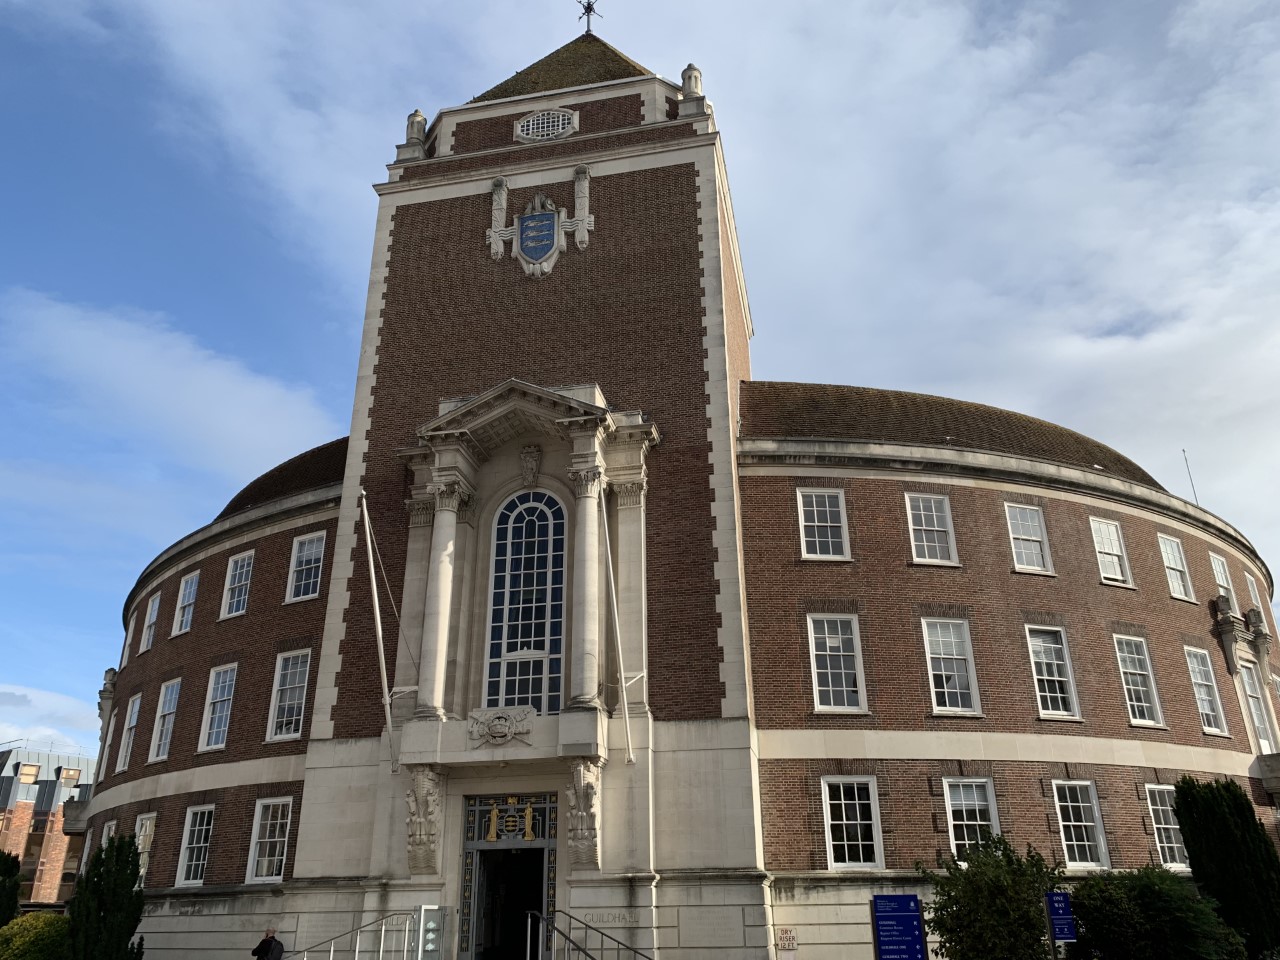 Kingston Council defends £80,000 spend on consultation